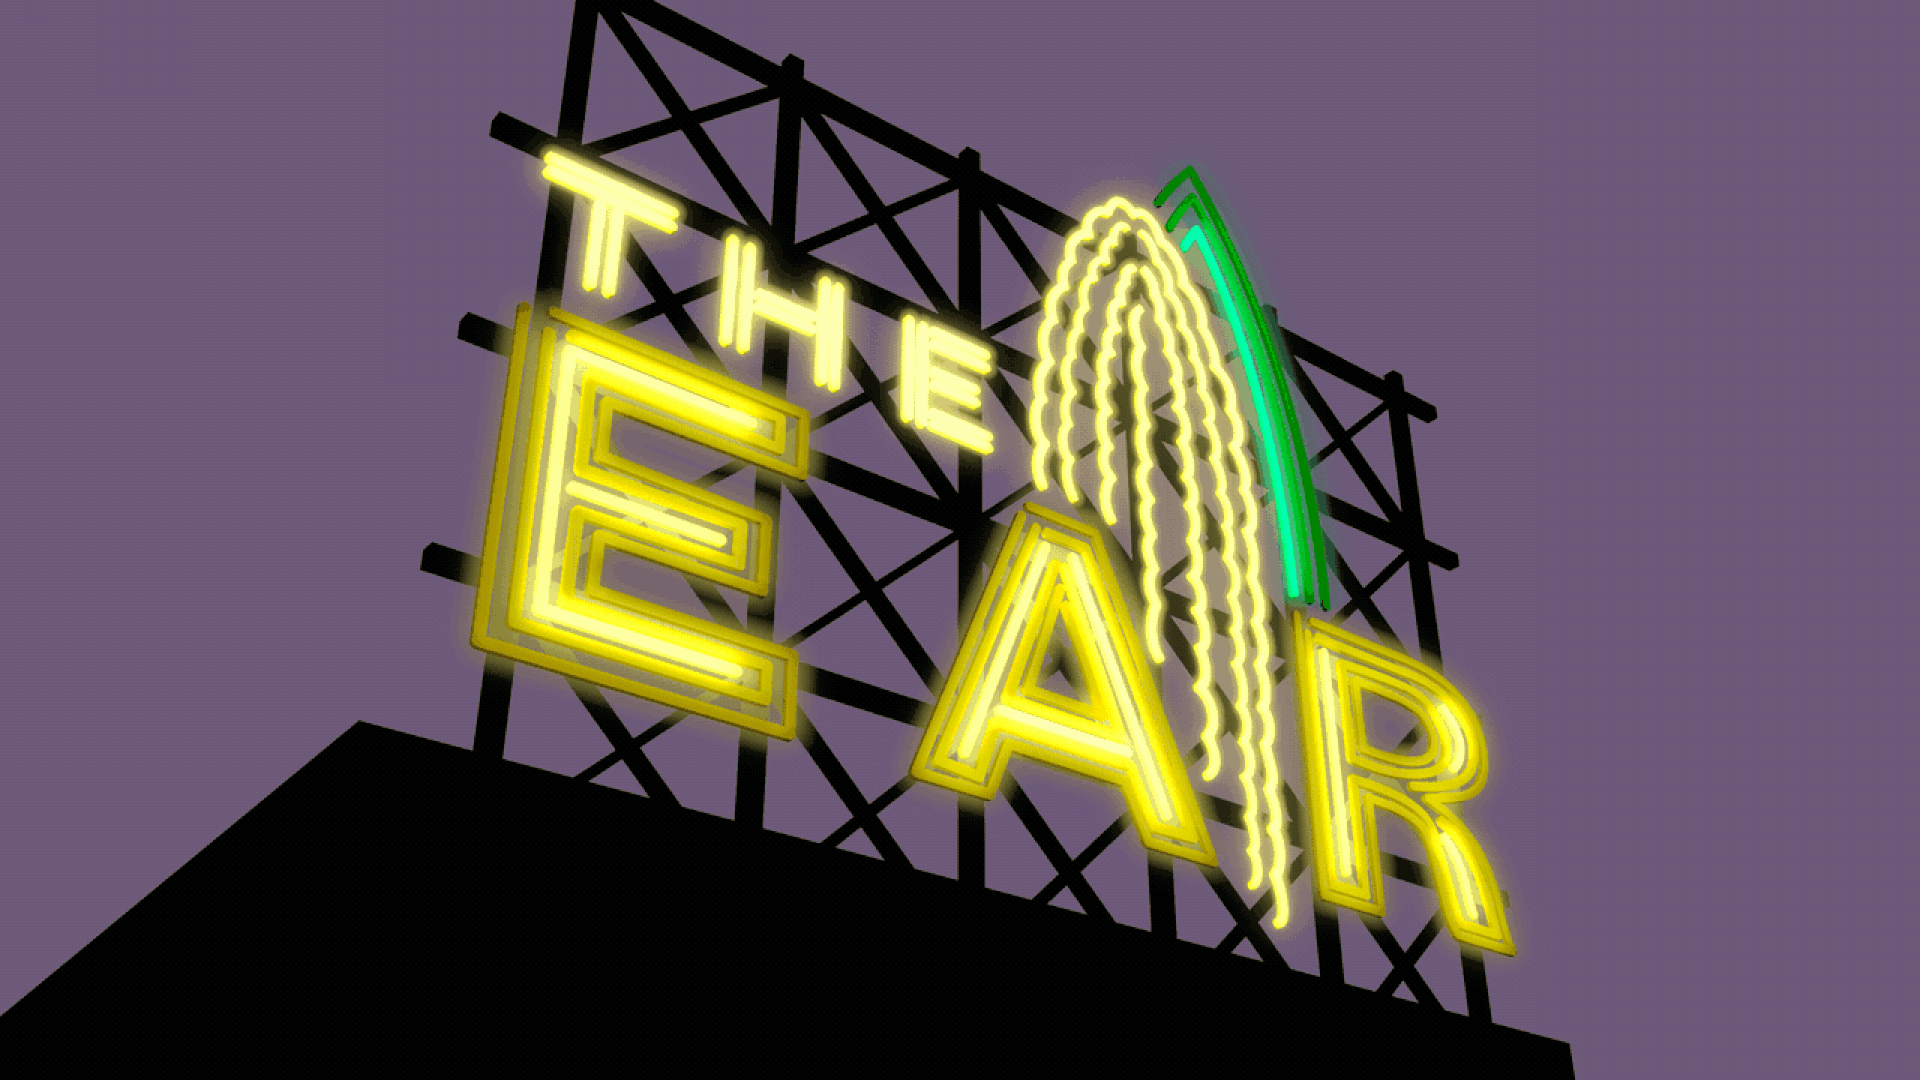 Illustration of a neon sign depicting an ear of corn, reading "The Ear."